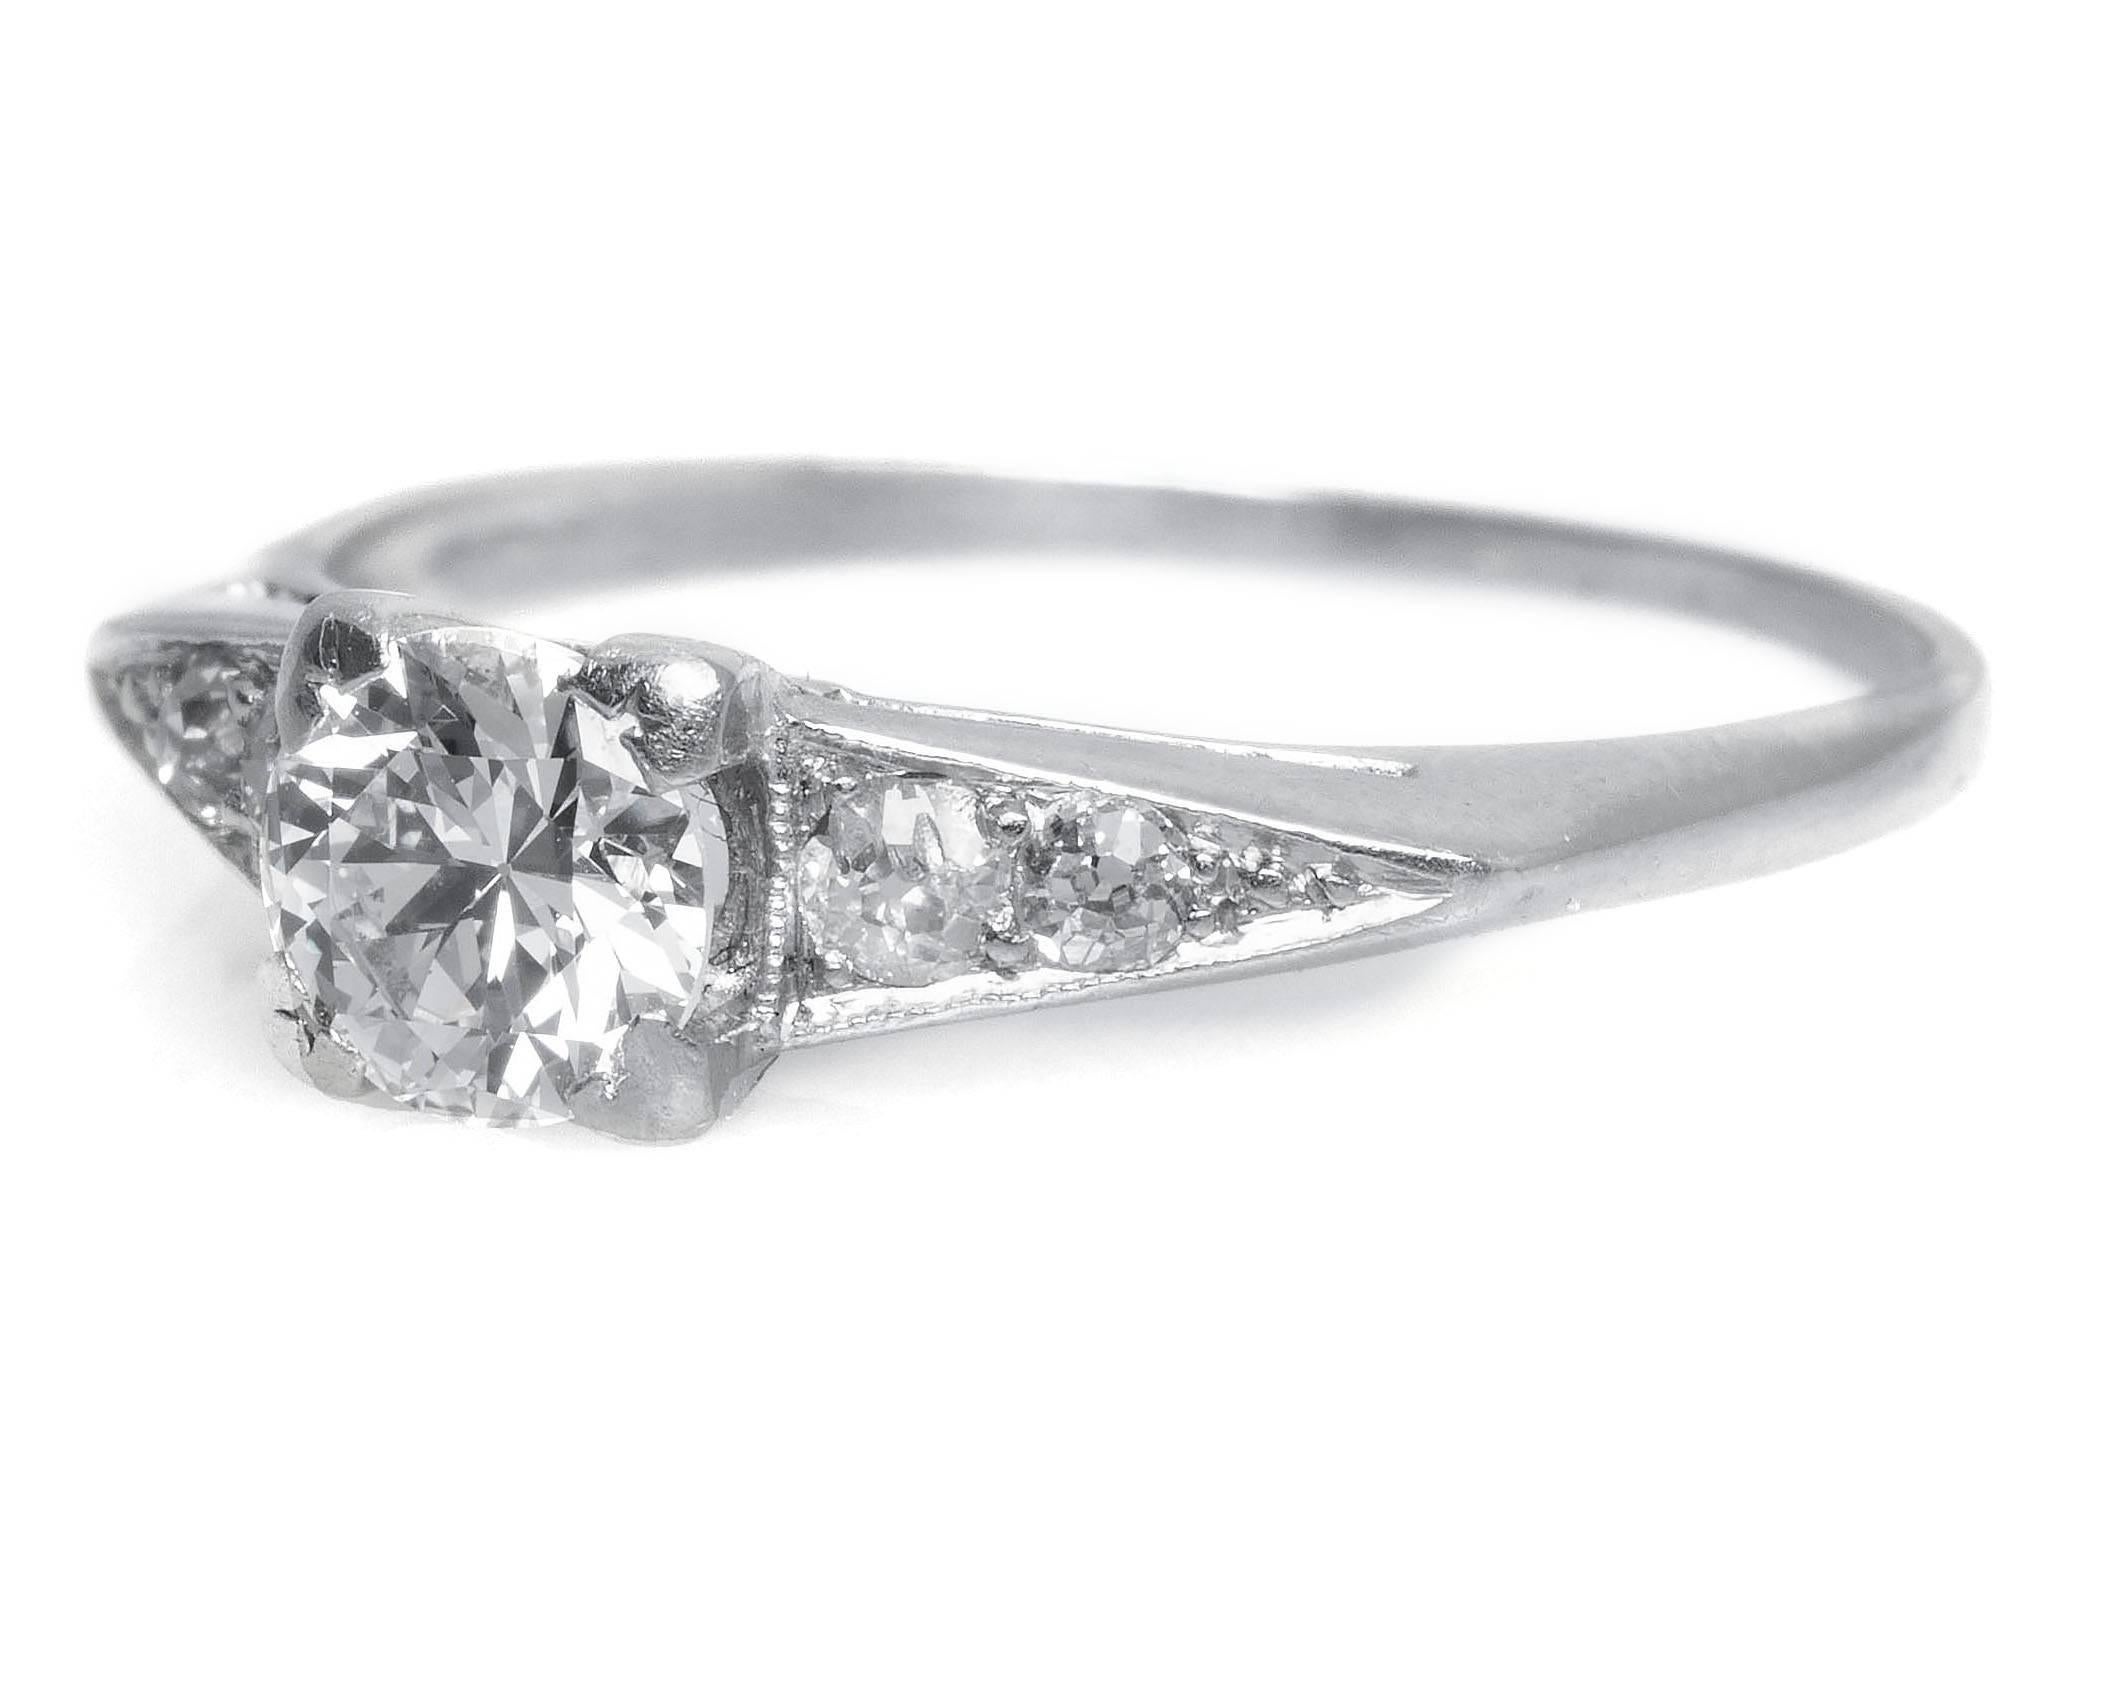 Item Details: 
Ring Size: 7
Metal Type: Platinum
Weight: 3.1 grams

Center Diamond Details
Shape: Old European Cut
Carat Weight: .60 carat
Color: I
Clarity: VS1

Side Stone Details: 
Total Carat Weight: .12 carat, total weight
Color: H
Clarity: